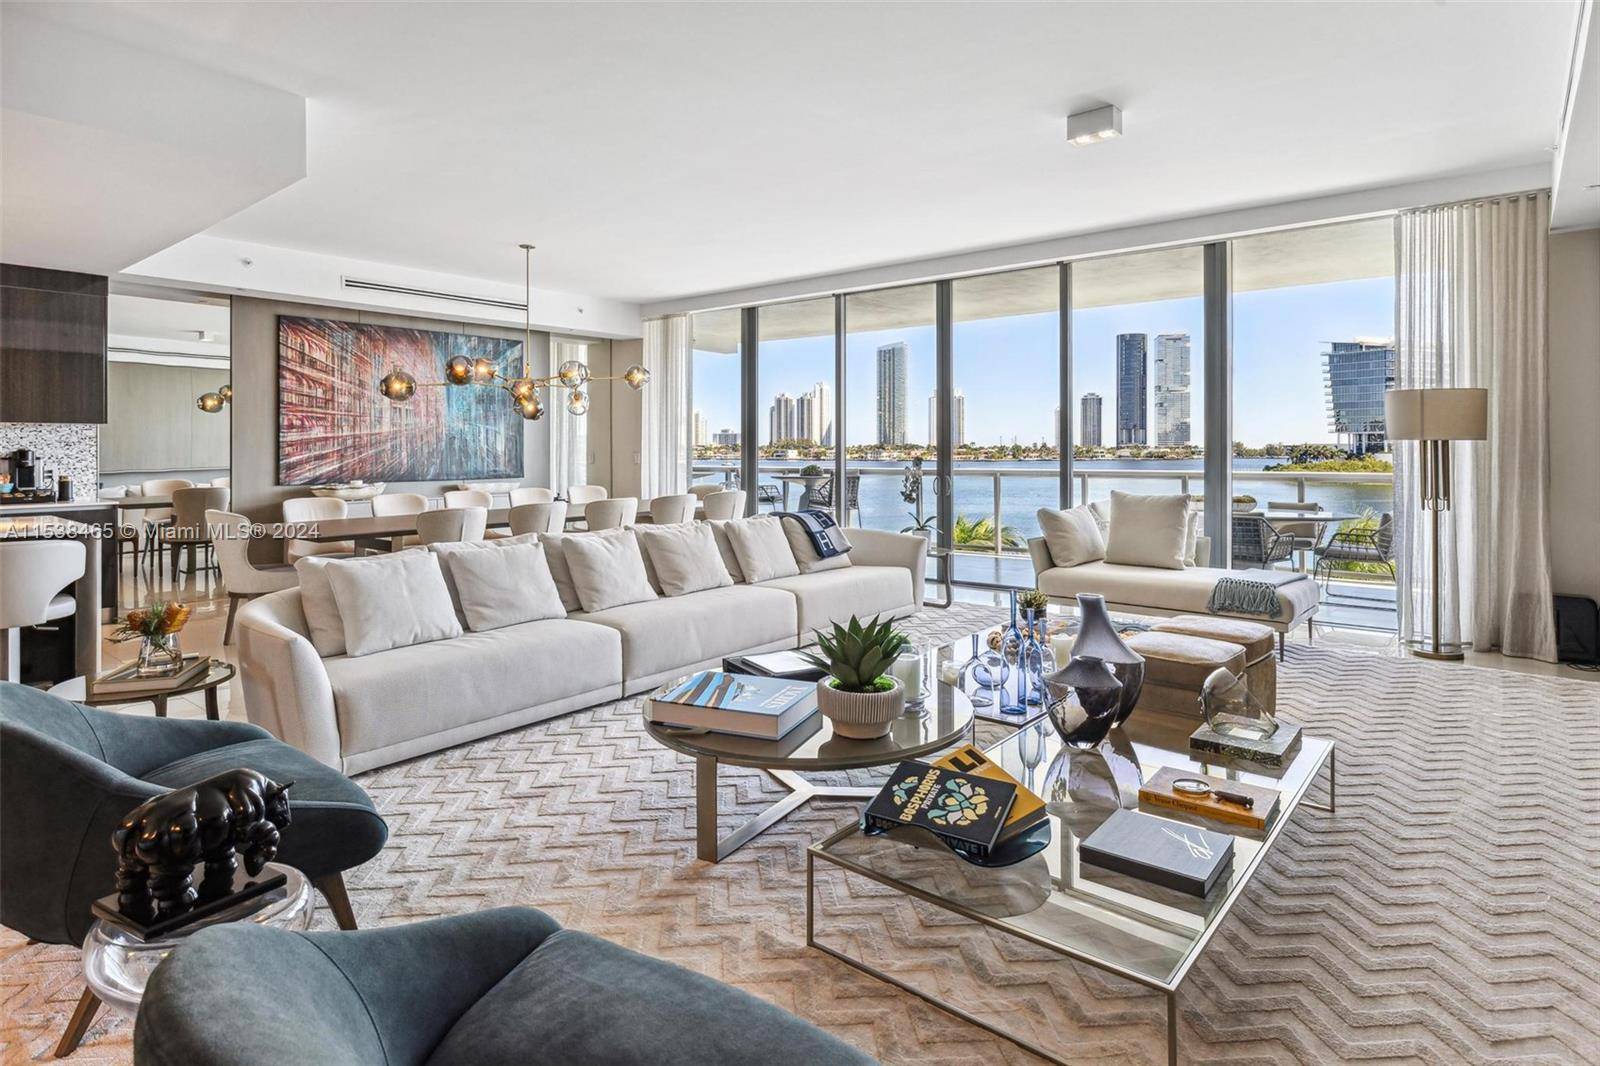 Must see unique, modern luxurious, fully renovated Echo Aventura corner residence features breathtaking Intracoastal views lots of natural light through its floor to ceiling windows.